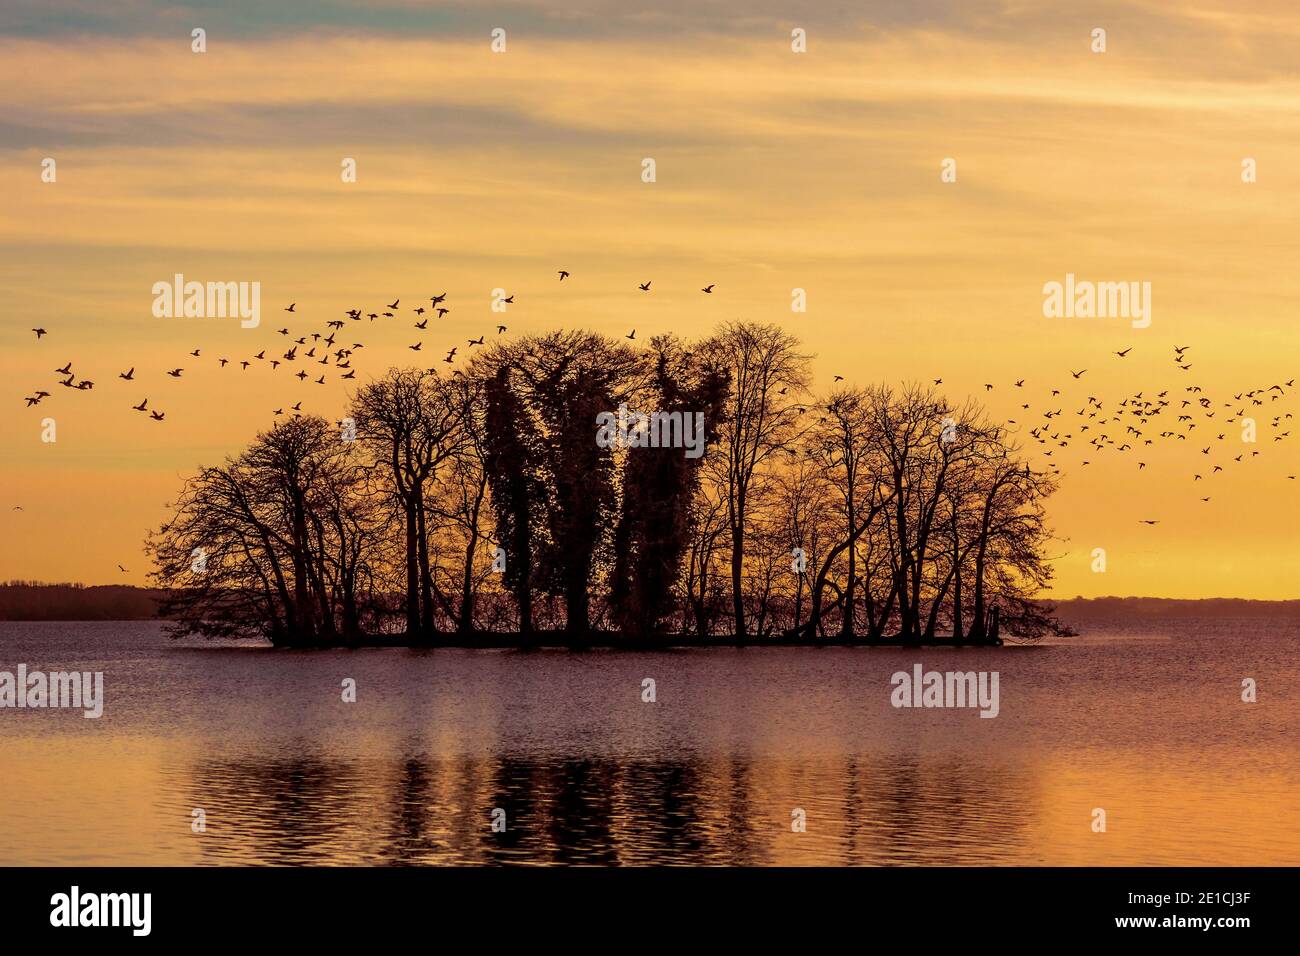 A flock of birds overflown a small island in Great Plön Lake, Germany. Cormorants use this space as a place to sleep and rest. Stock Photo